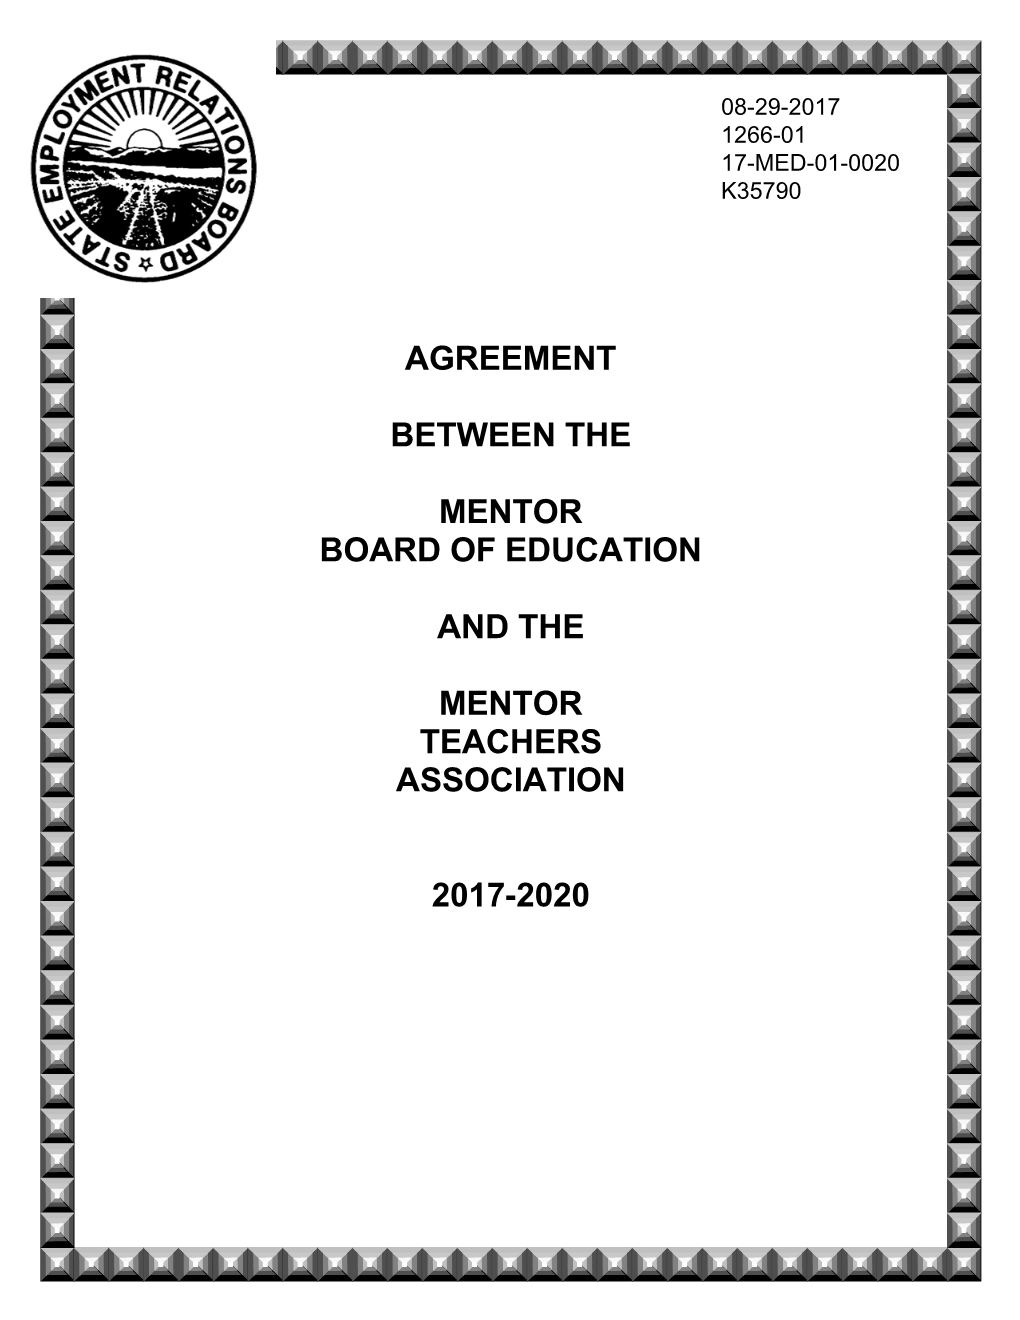 Agreement Between the Mentor Board of Education and the Mentor Teachers Association